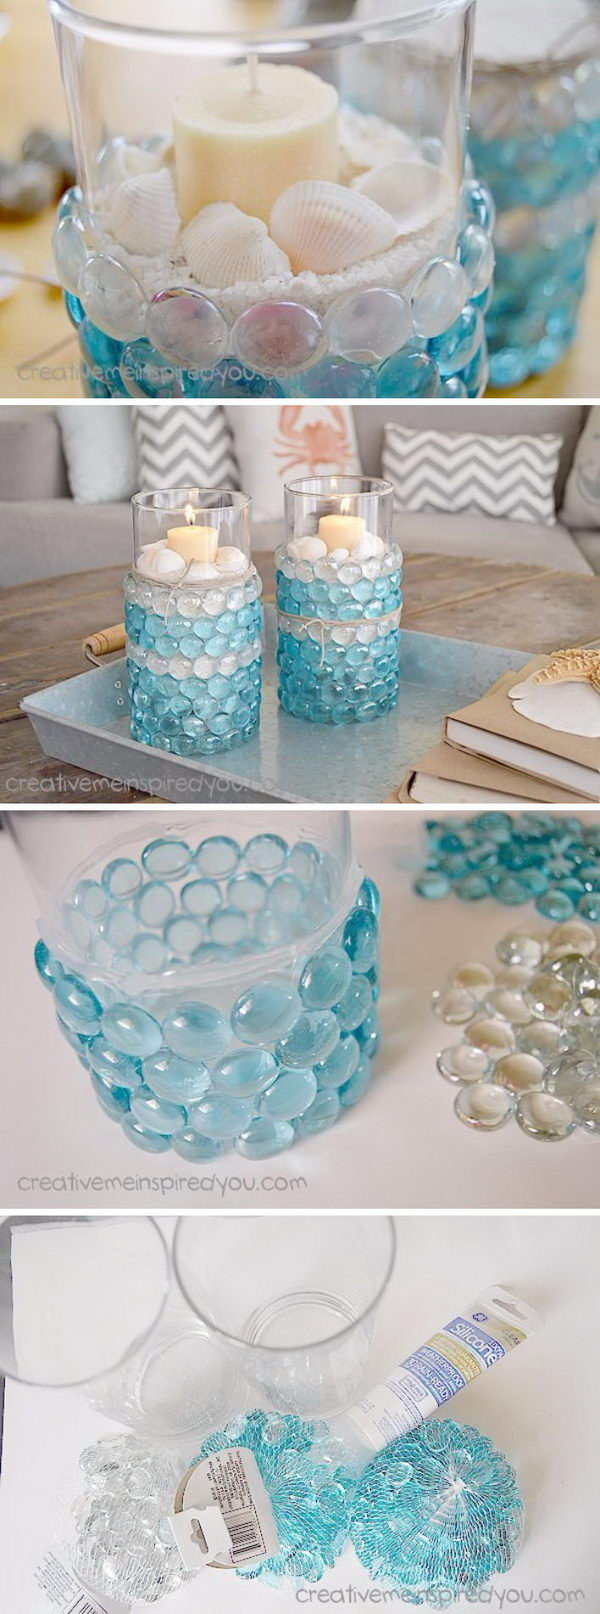 Nautical DIY Decorations
 60 Nautical Decor DIY Ideas To Spruce Up Your Home Hative